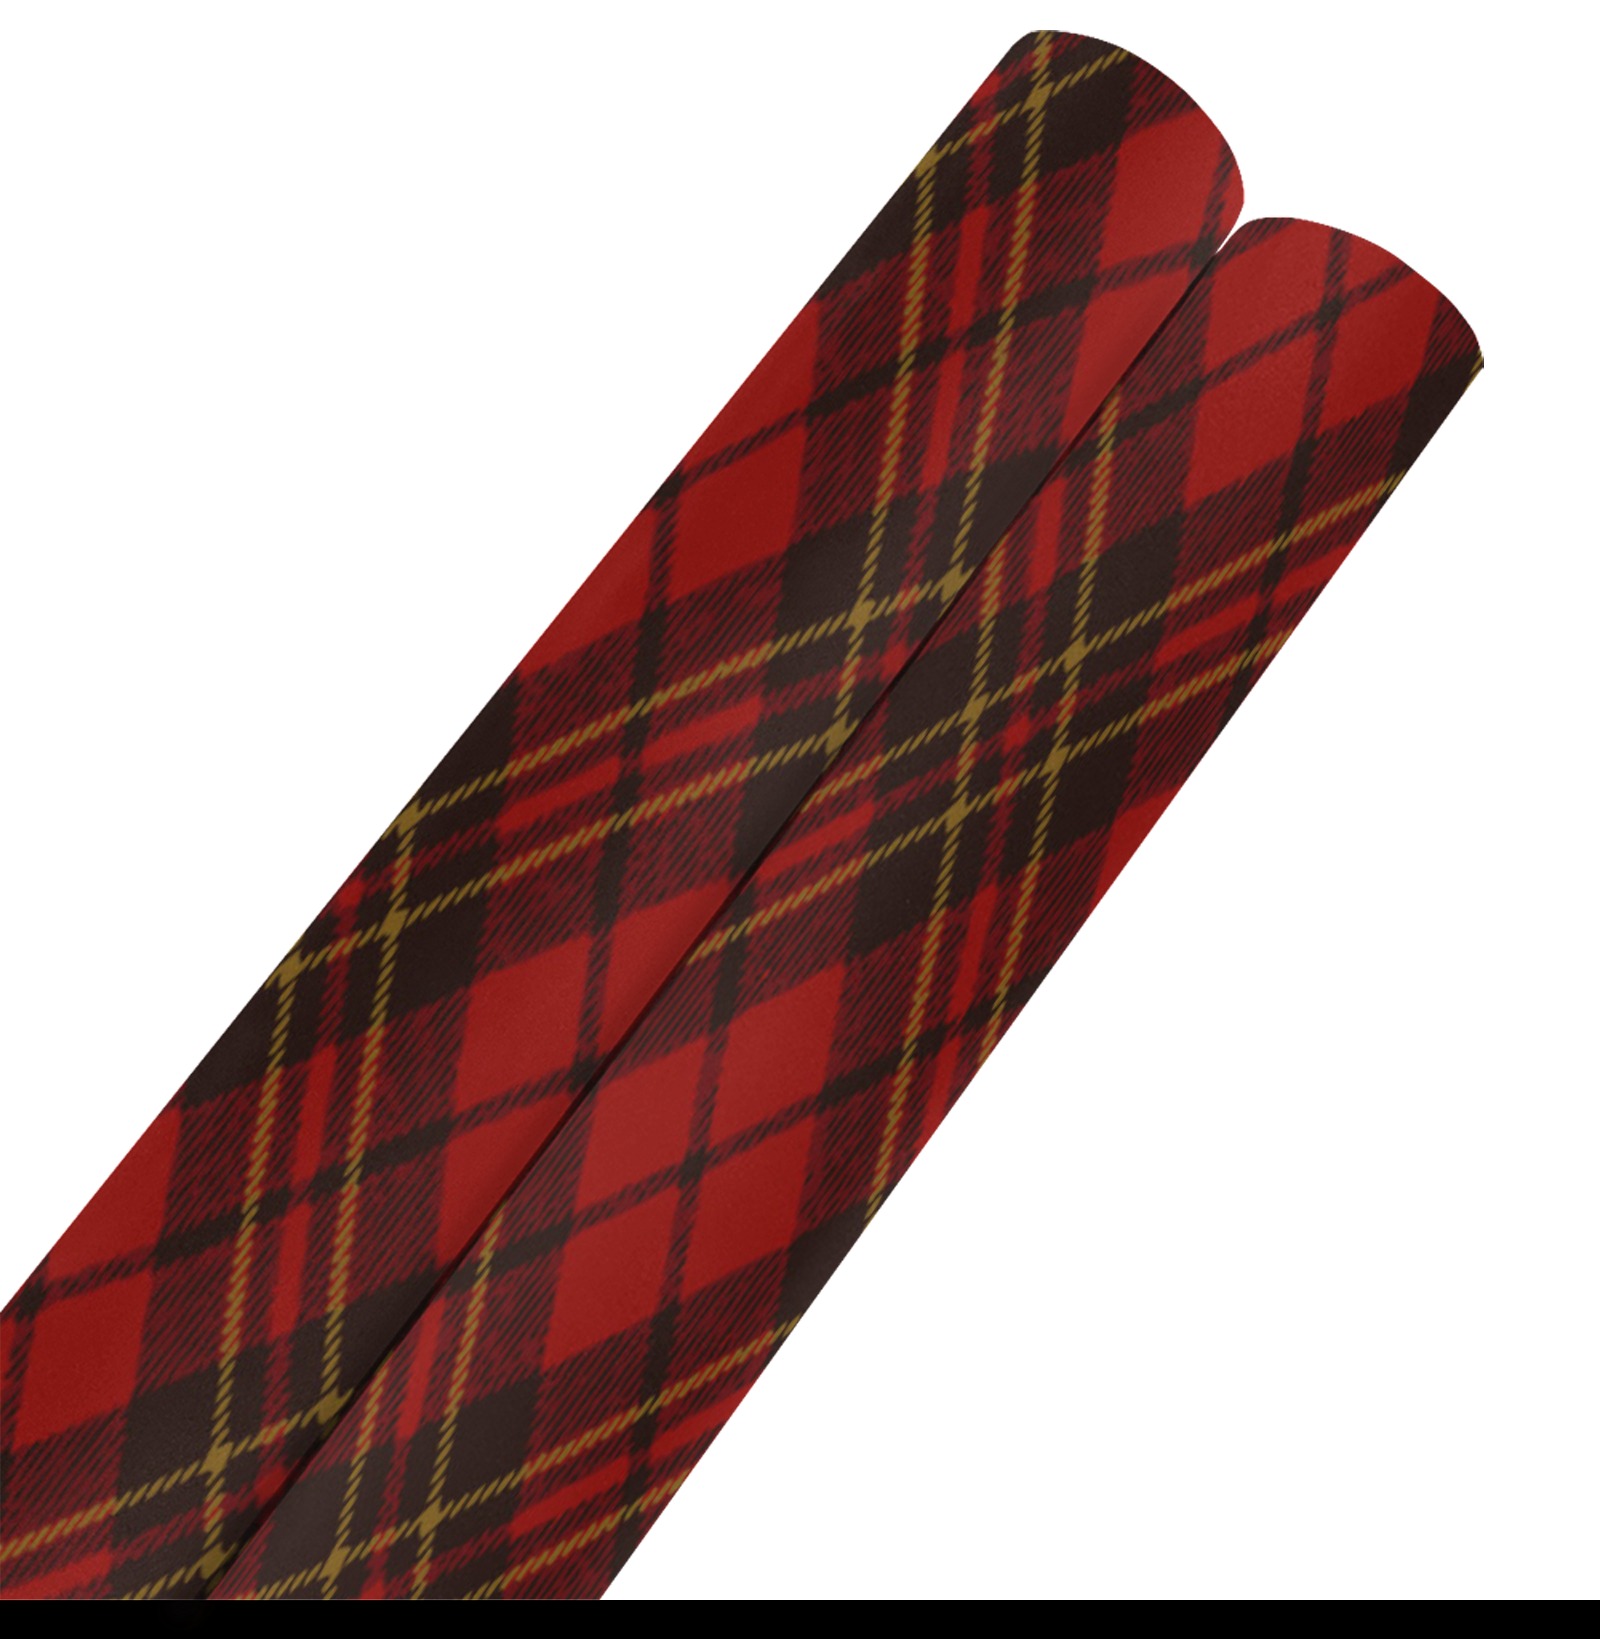 Red tartan plaid winter Christmas pattern holidays Gift Wrapping Paper 58"x 23" (2 Rolls)